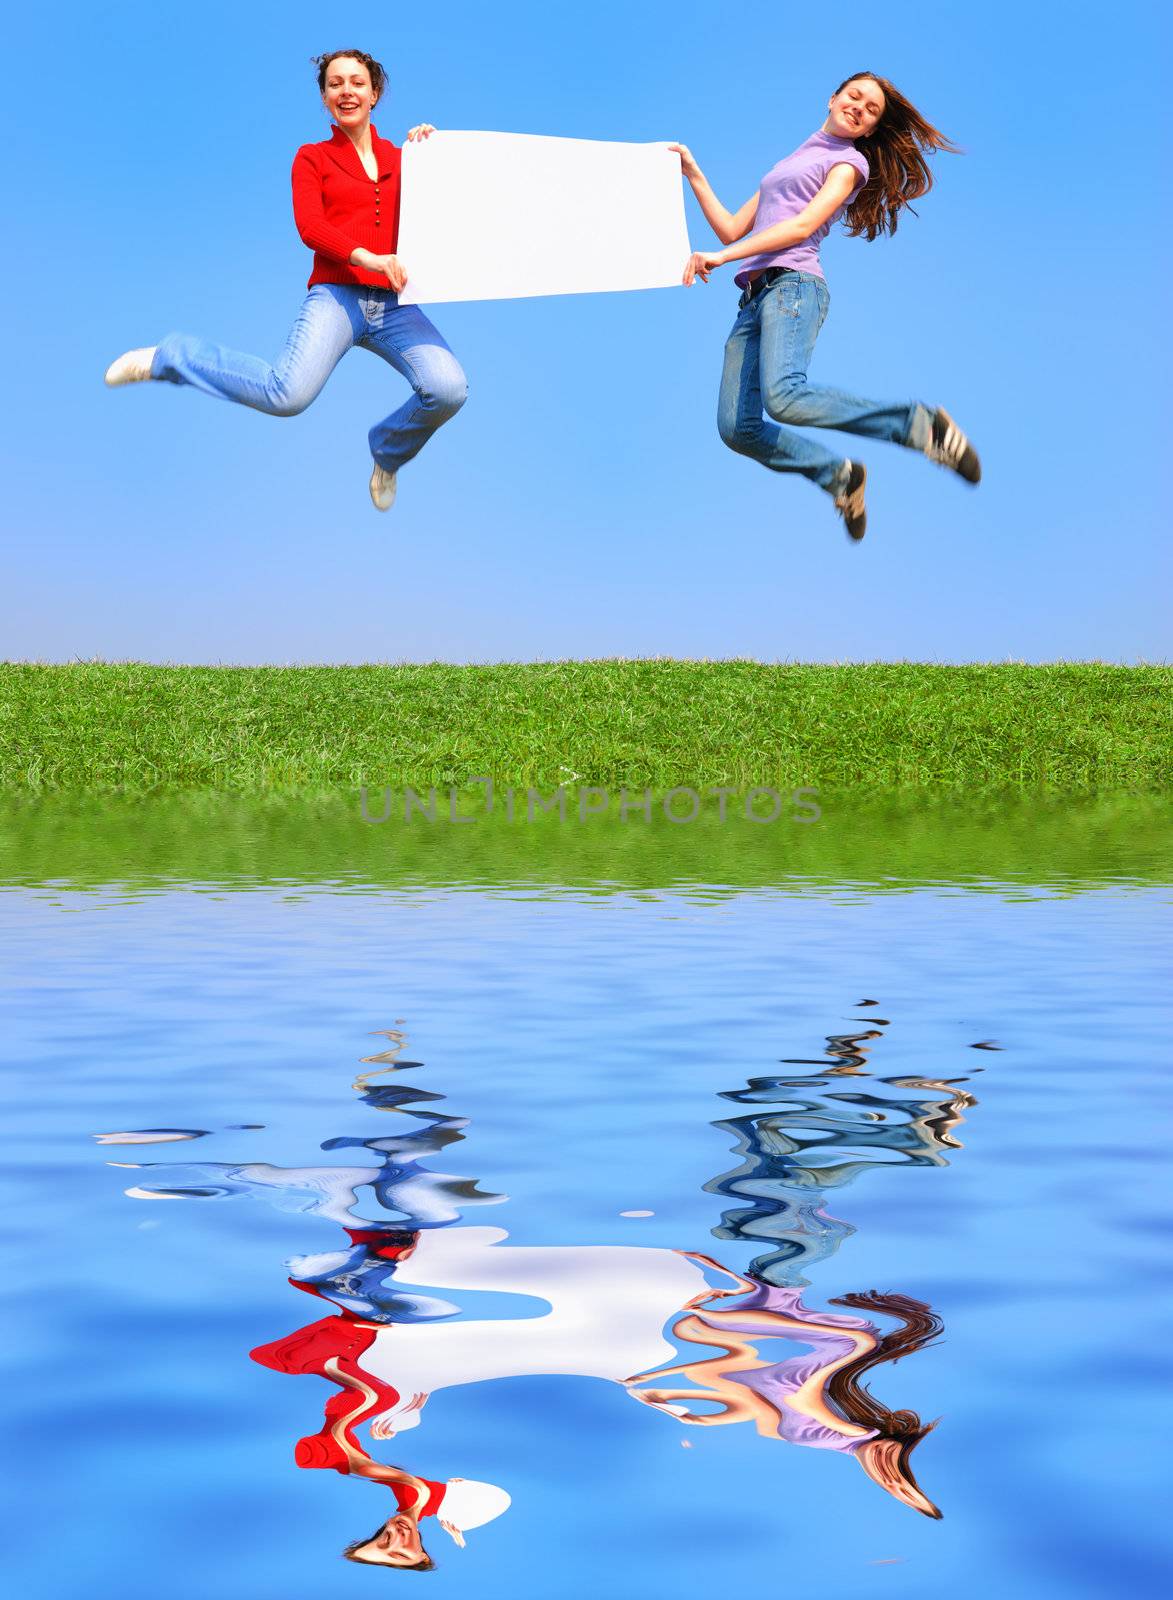 Girls jumping with blank sheet against blue sky with reflection on water